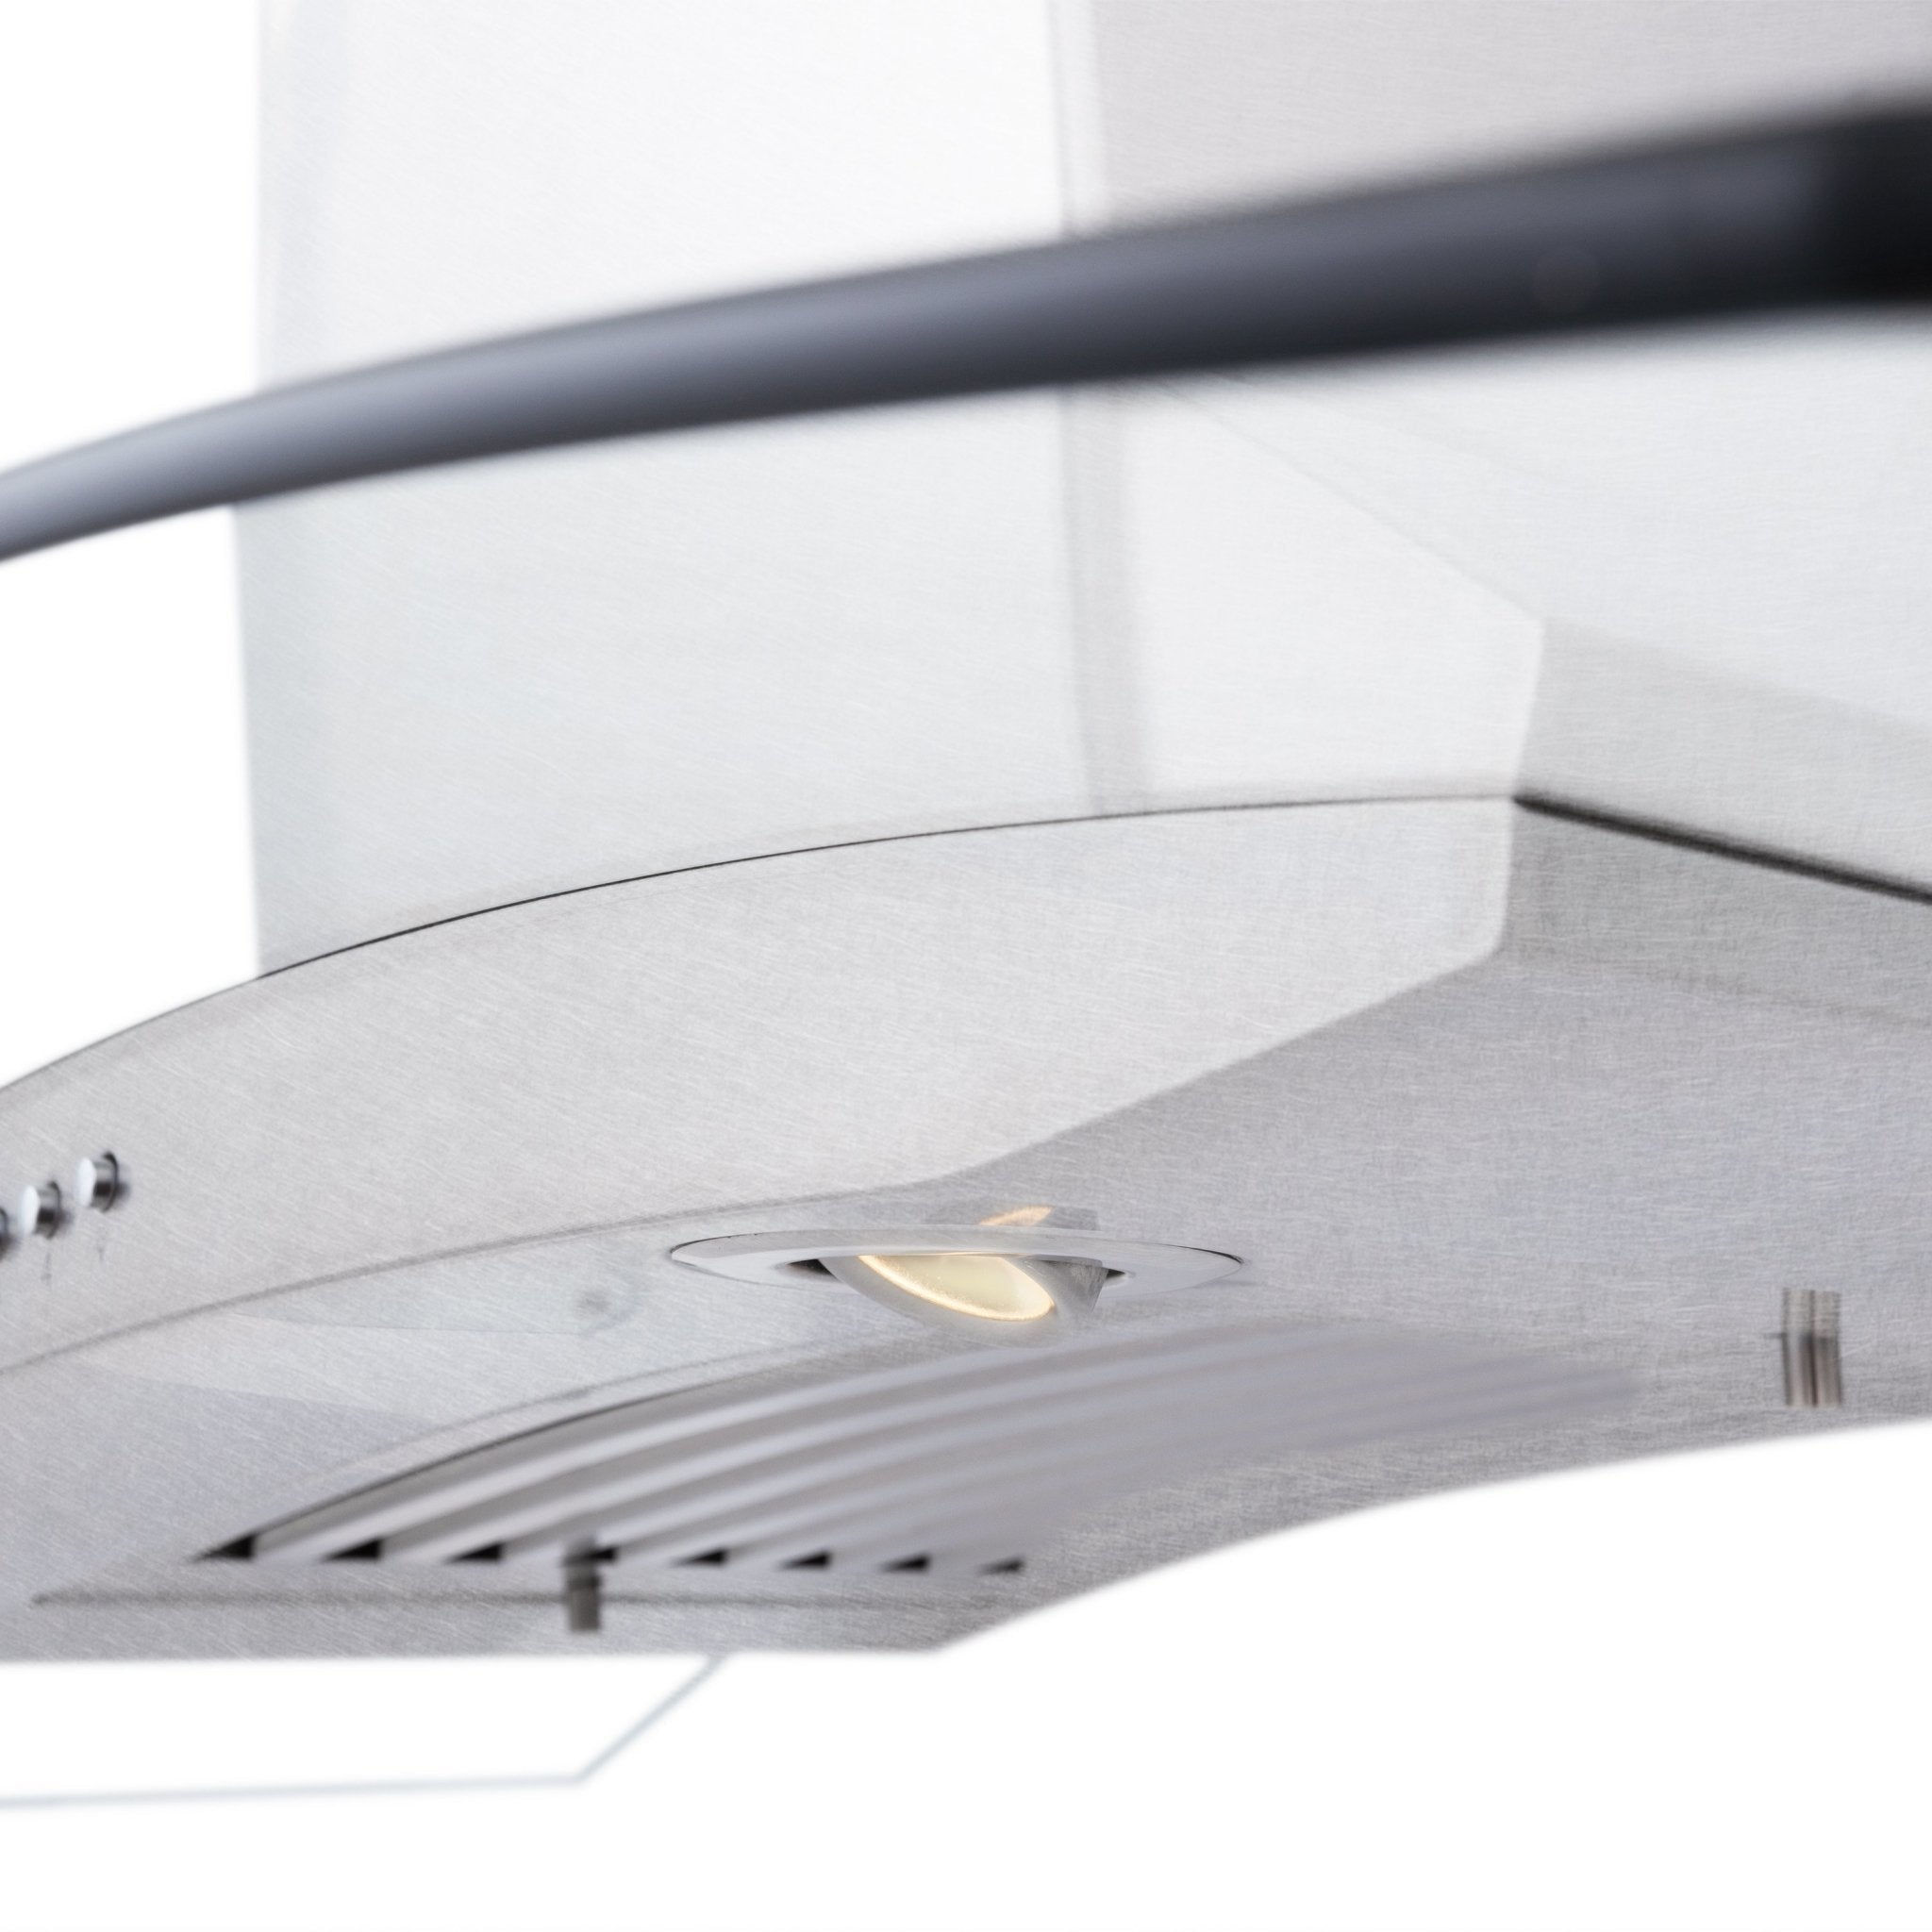 Built-in directional LED cooktop lighting.